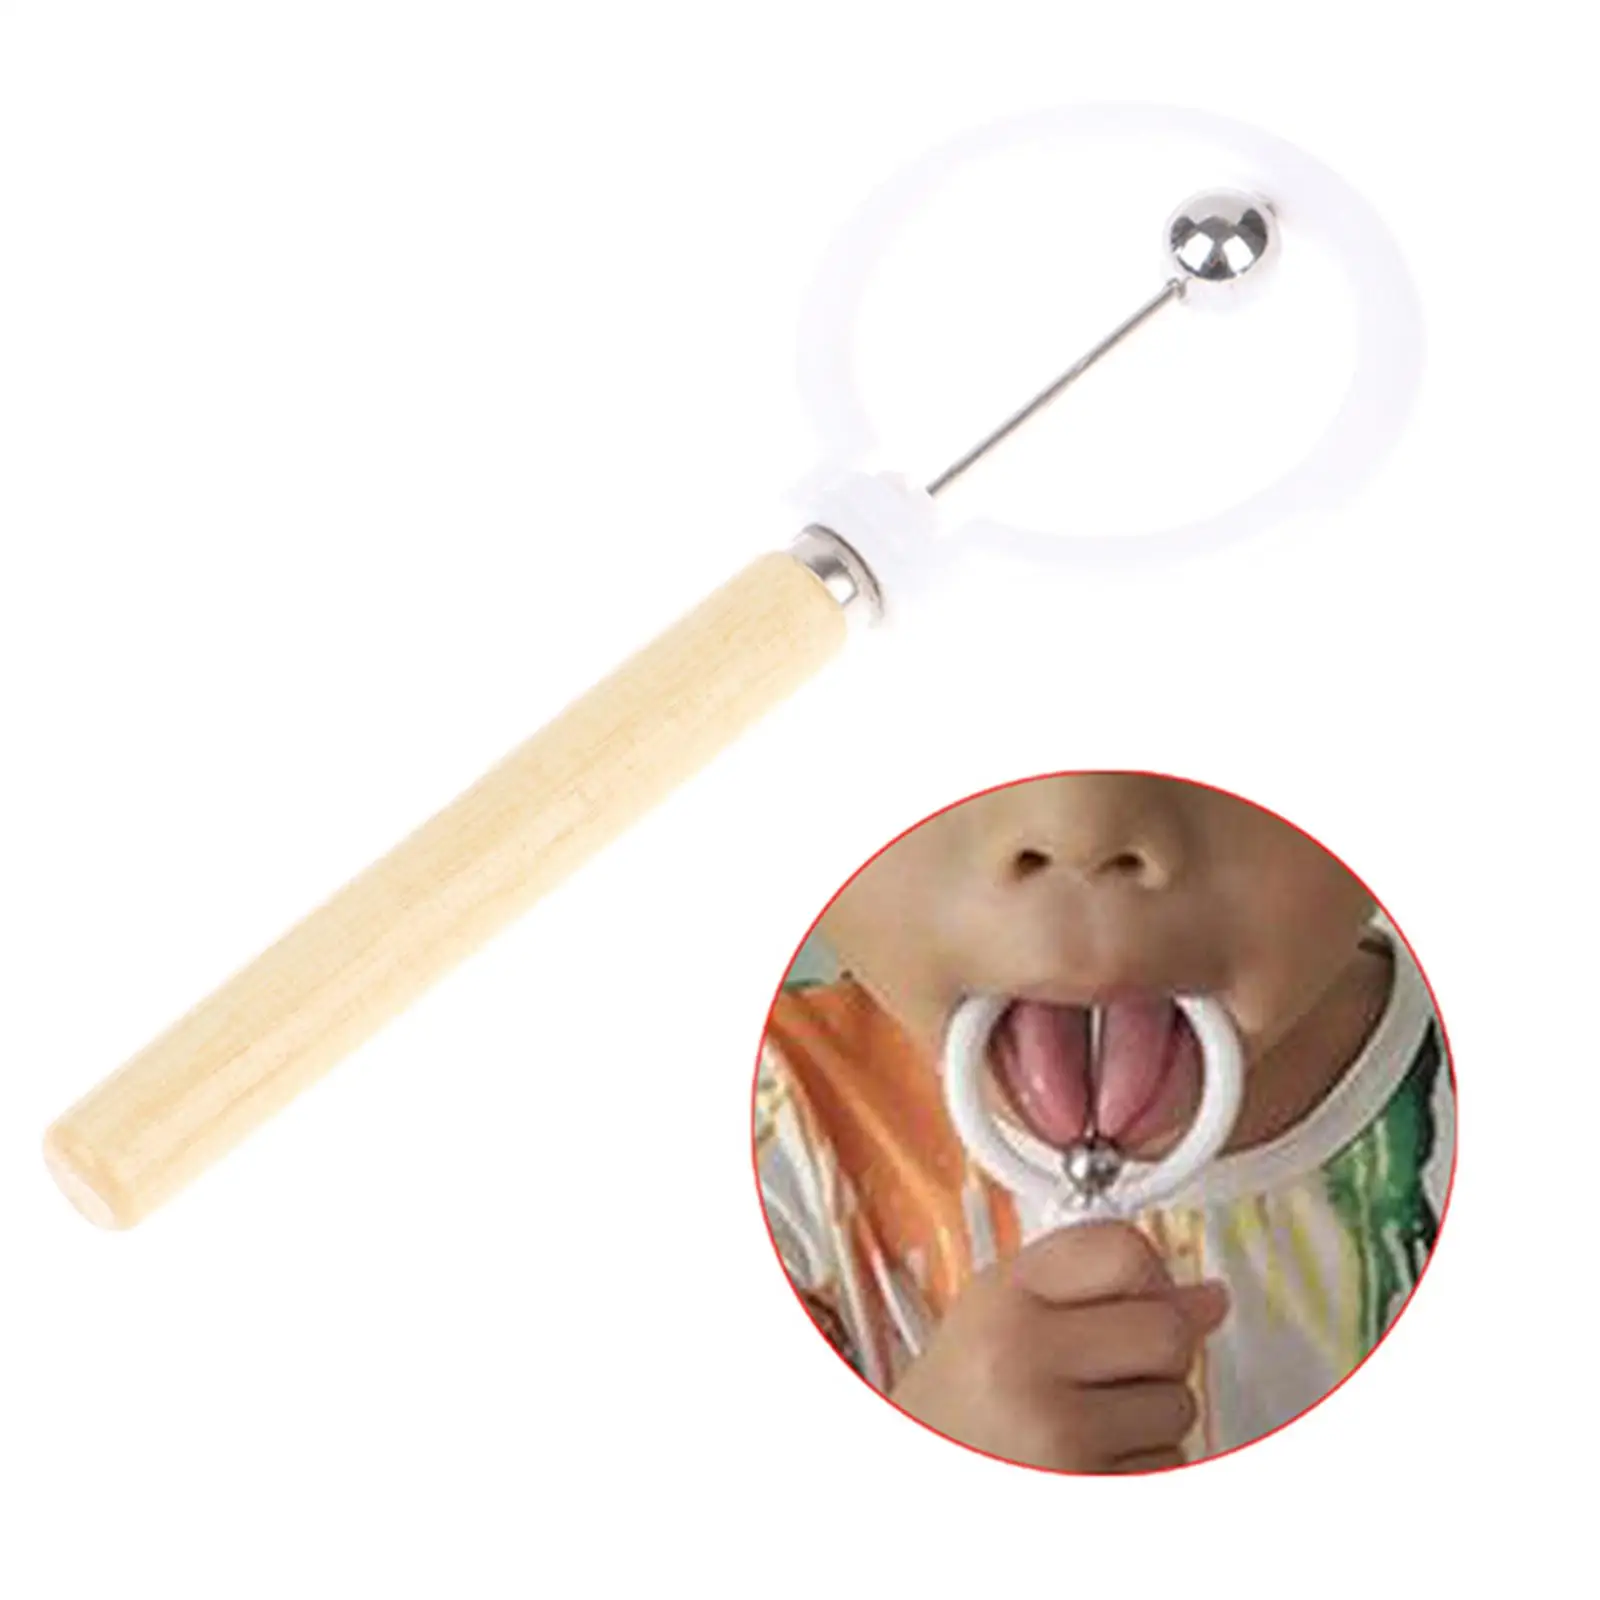 Tongue Exerciser Tongue Muscle Training Tool Flexibility Stability Mouth Trainer for Kids 